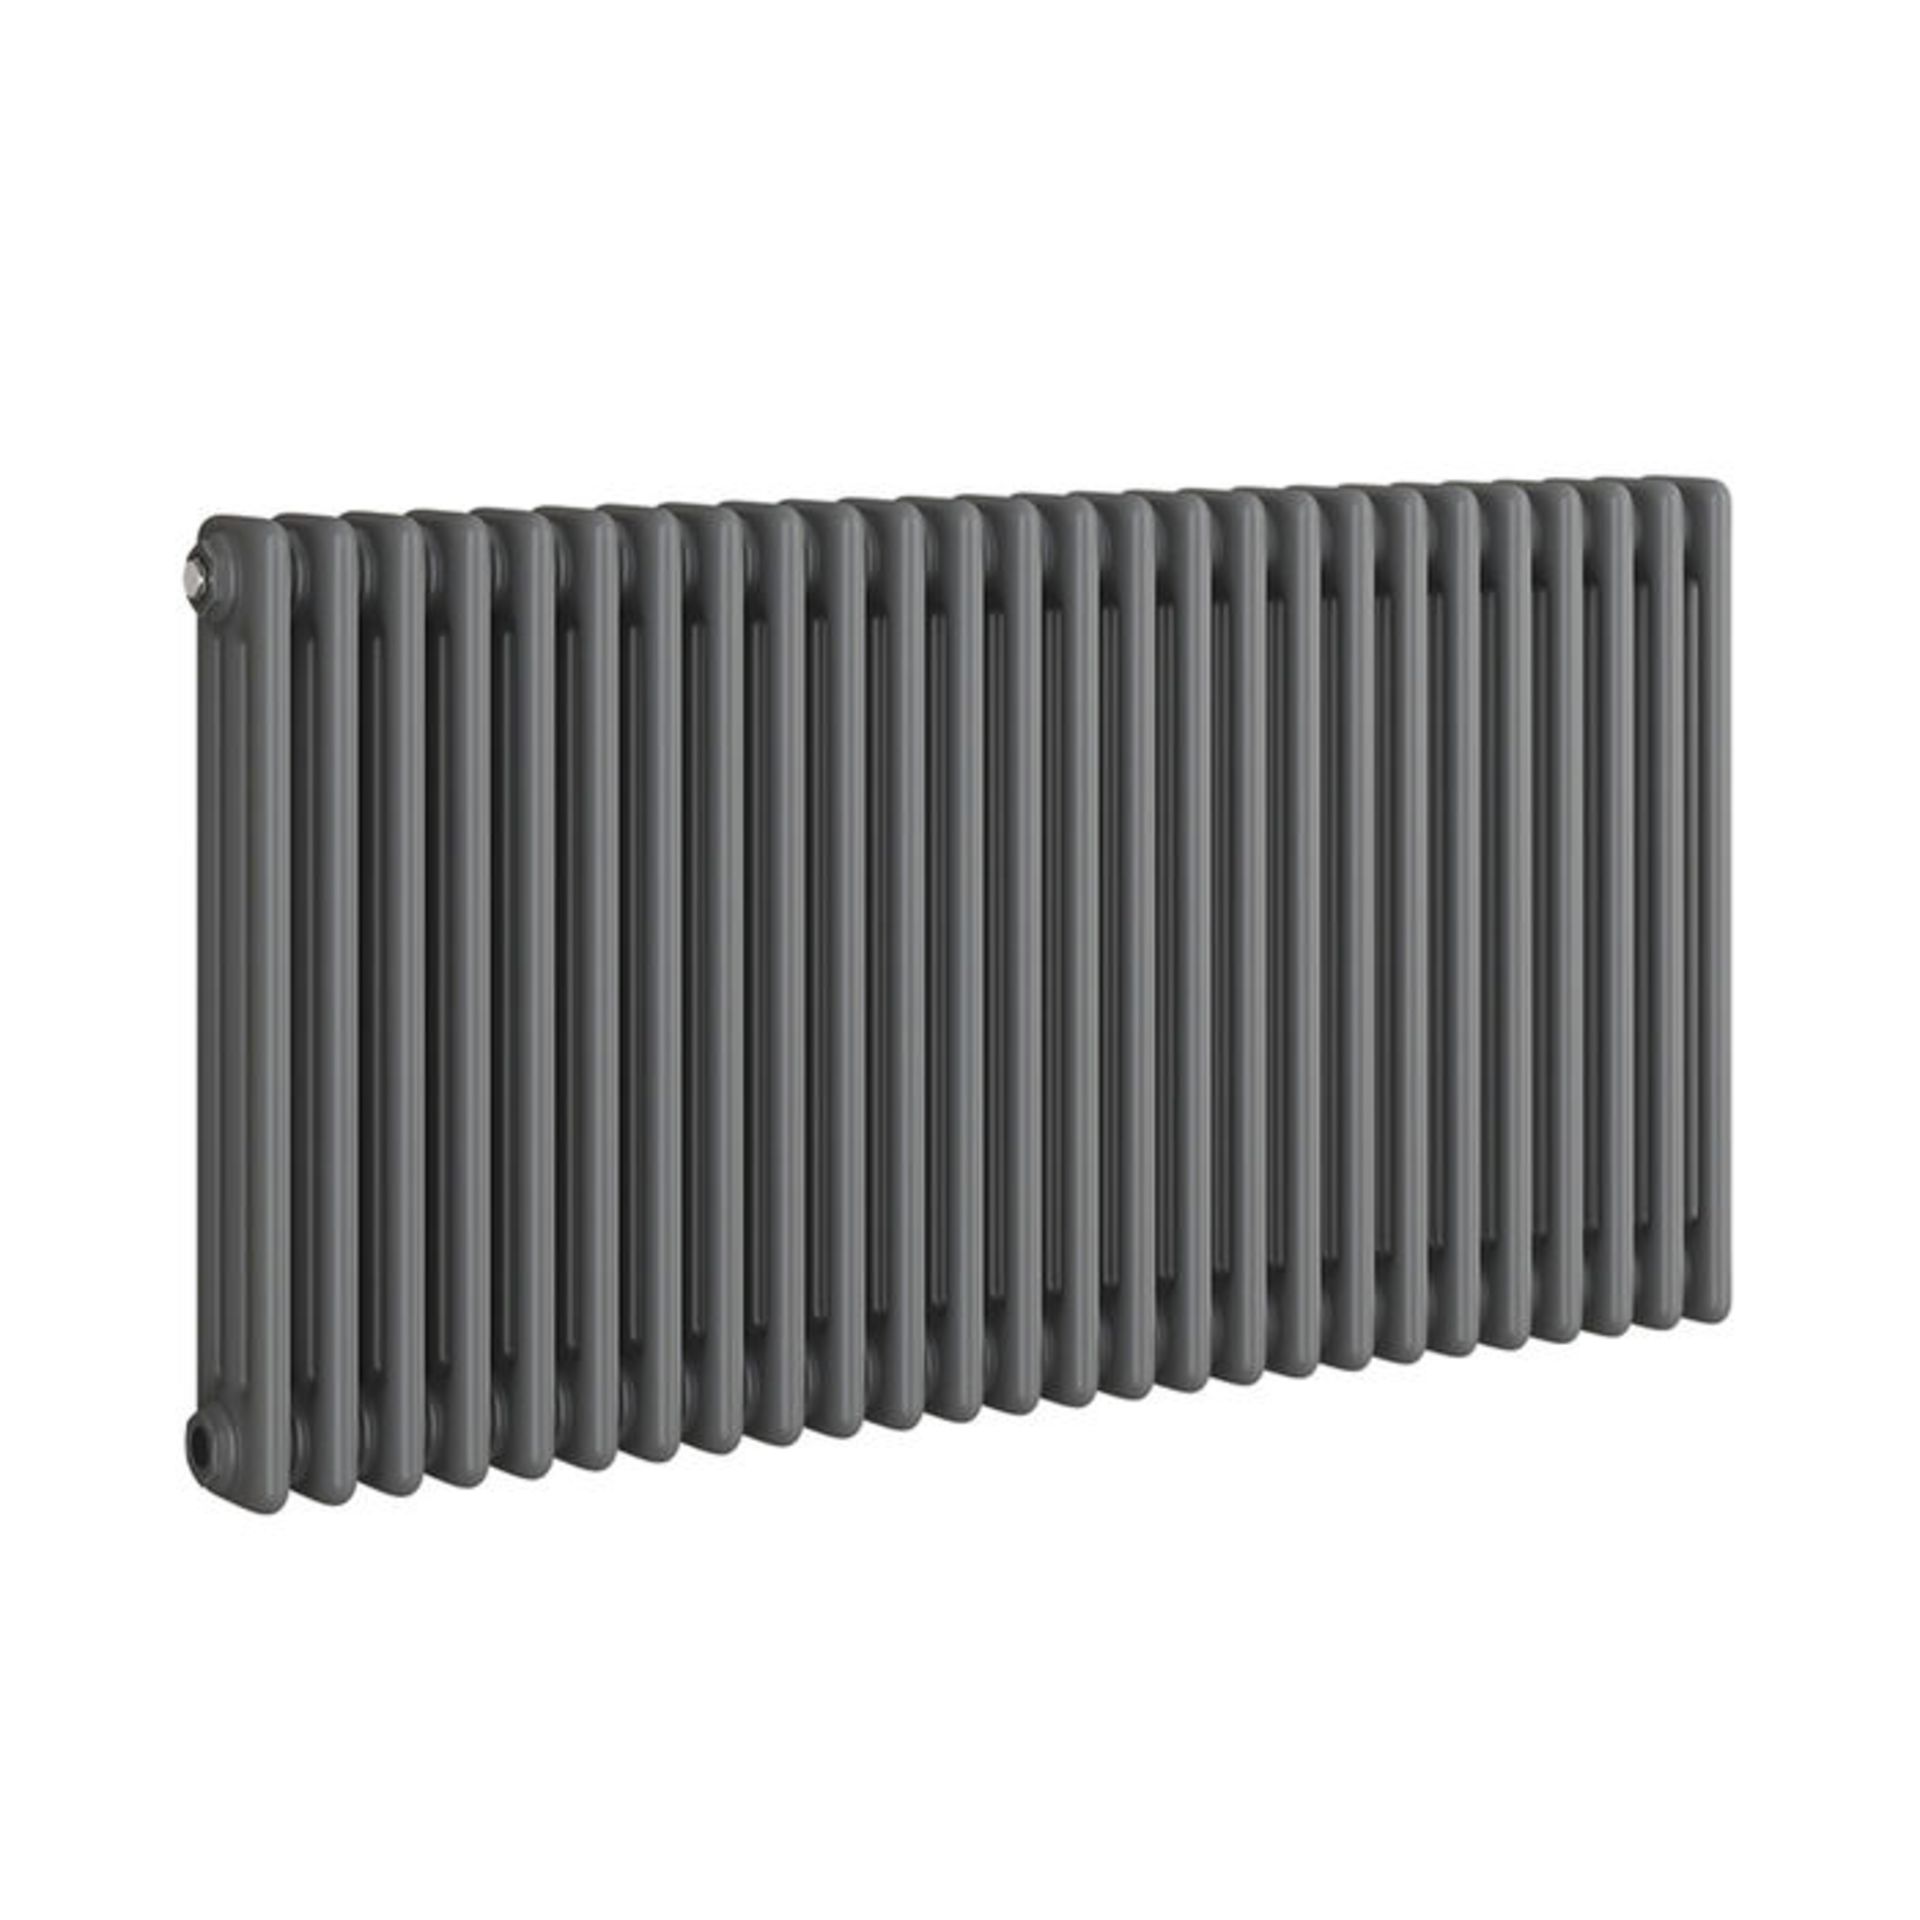 (ZL8) 600x1177mm Anthracite Triple Panel Horizontal Colosseum Traditional Radiator. RRP £524.99. - Image 4 of 4